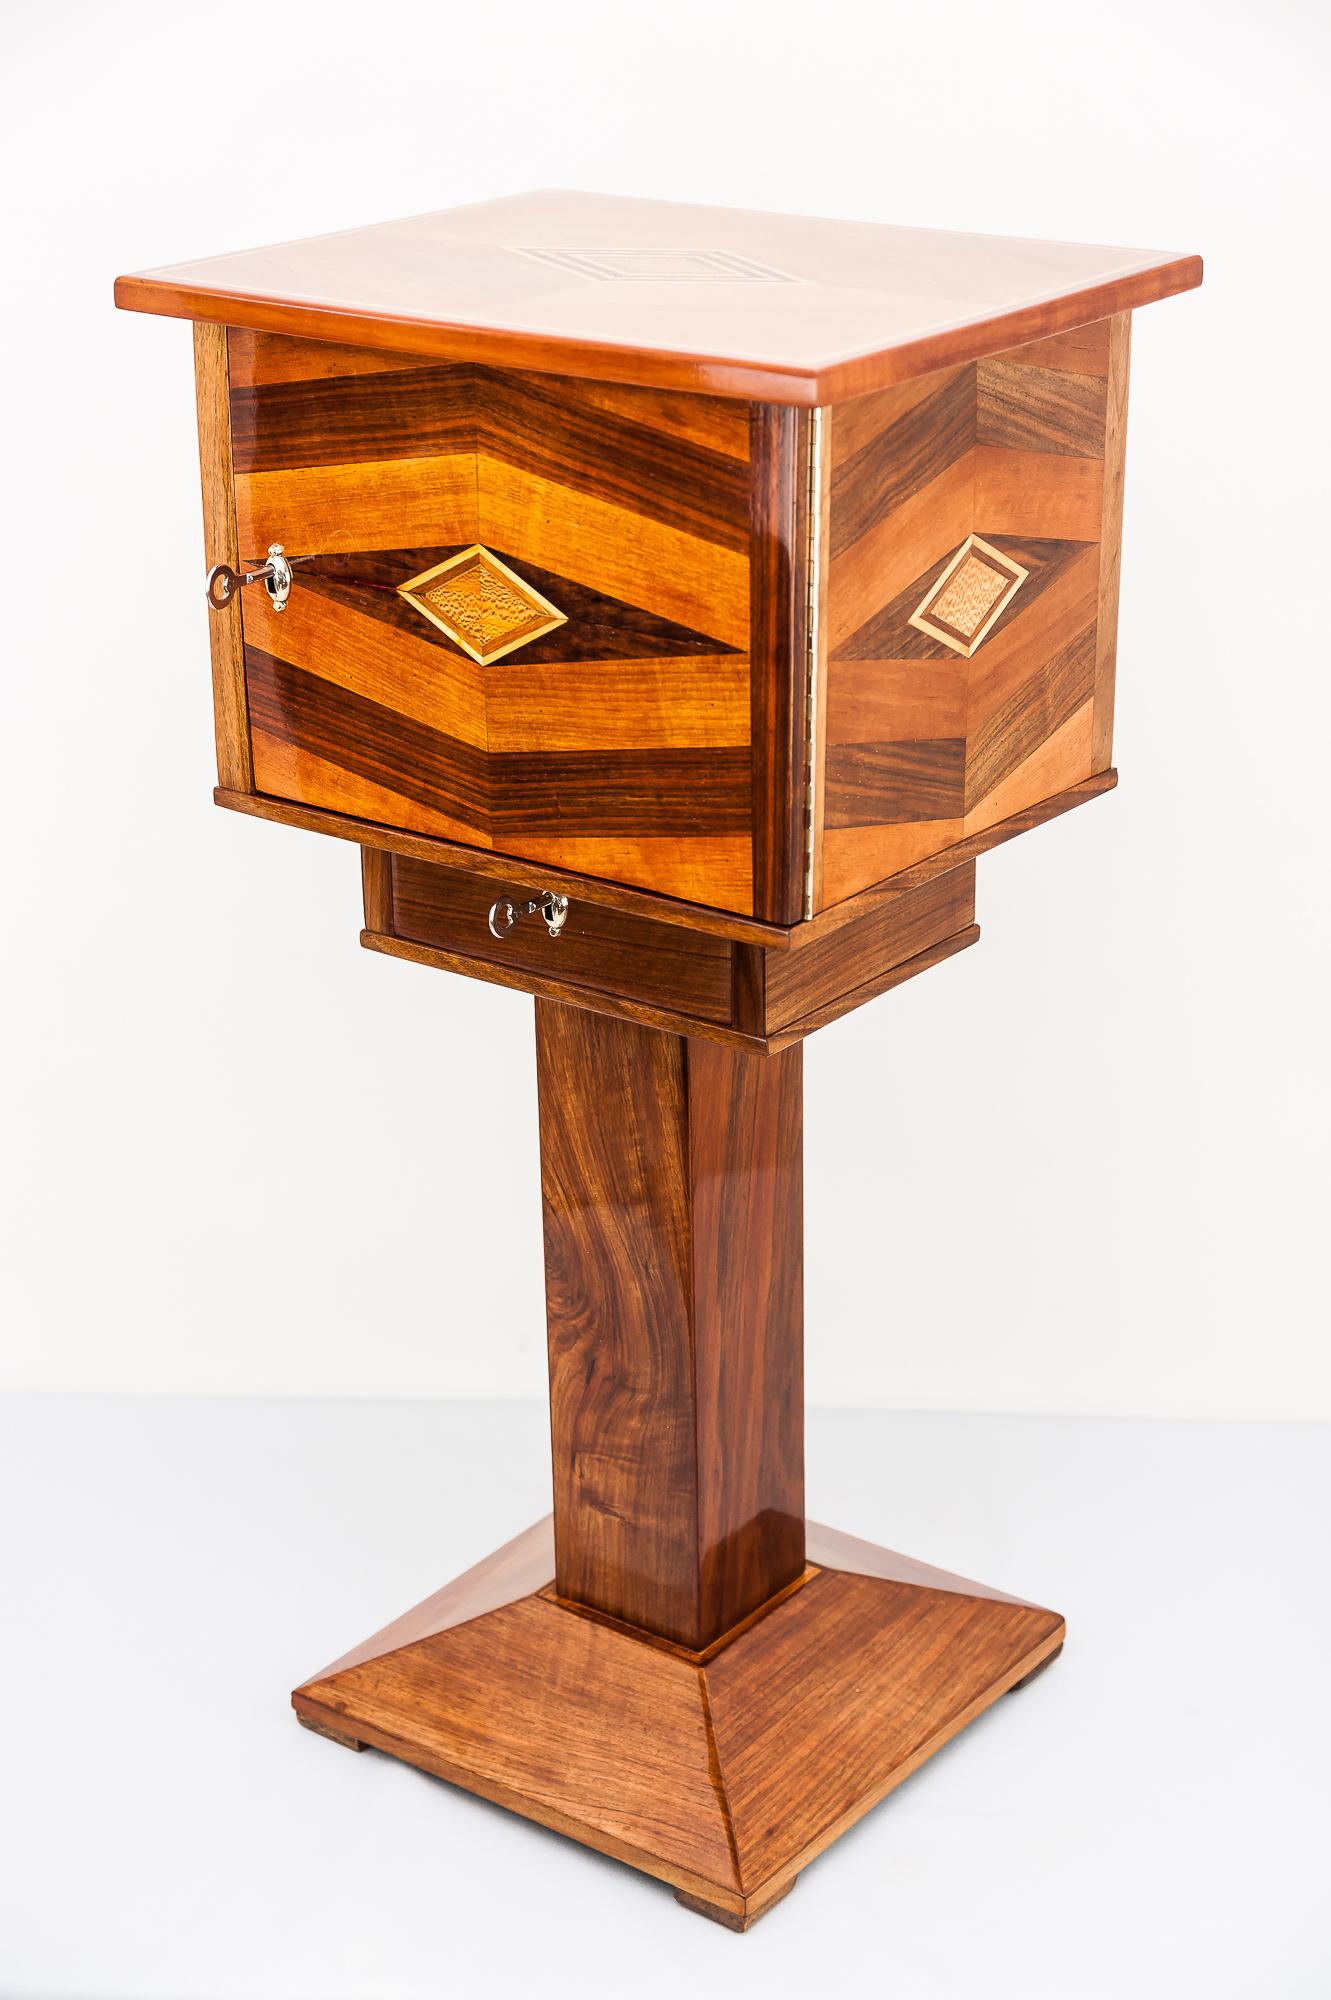 Austrian Art Deco Table with 4 Drawers Execution in Polished Nut Wood with Inlay, 1920s